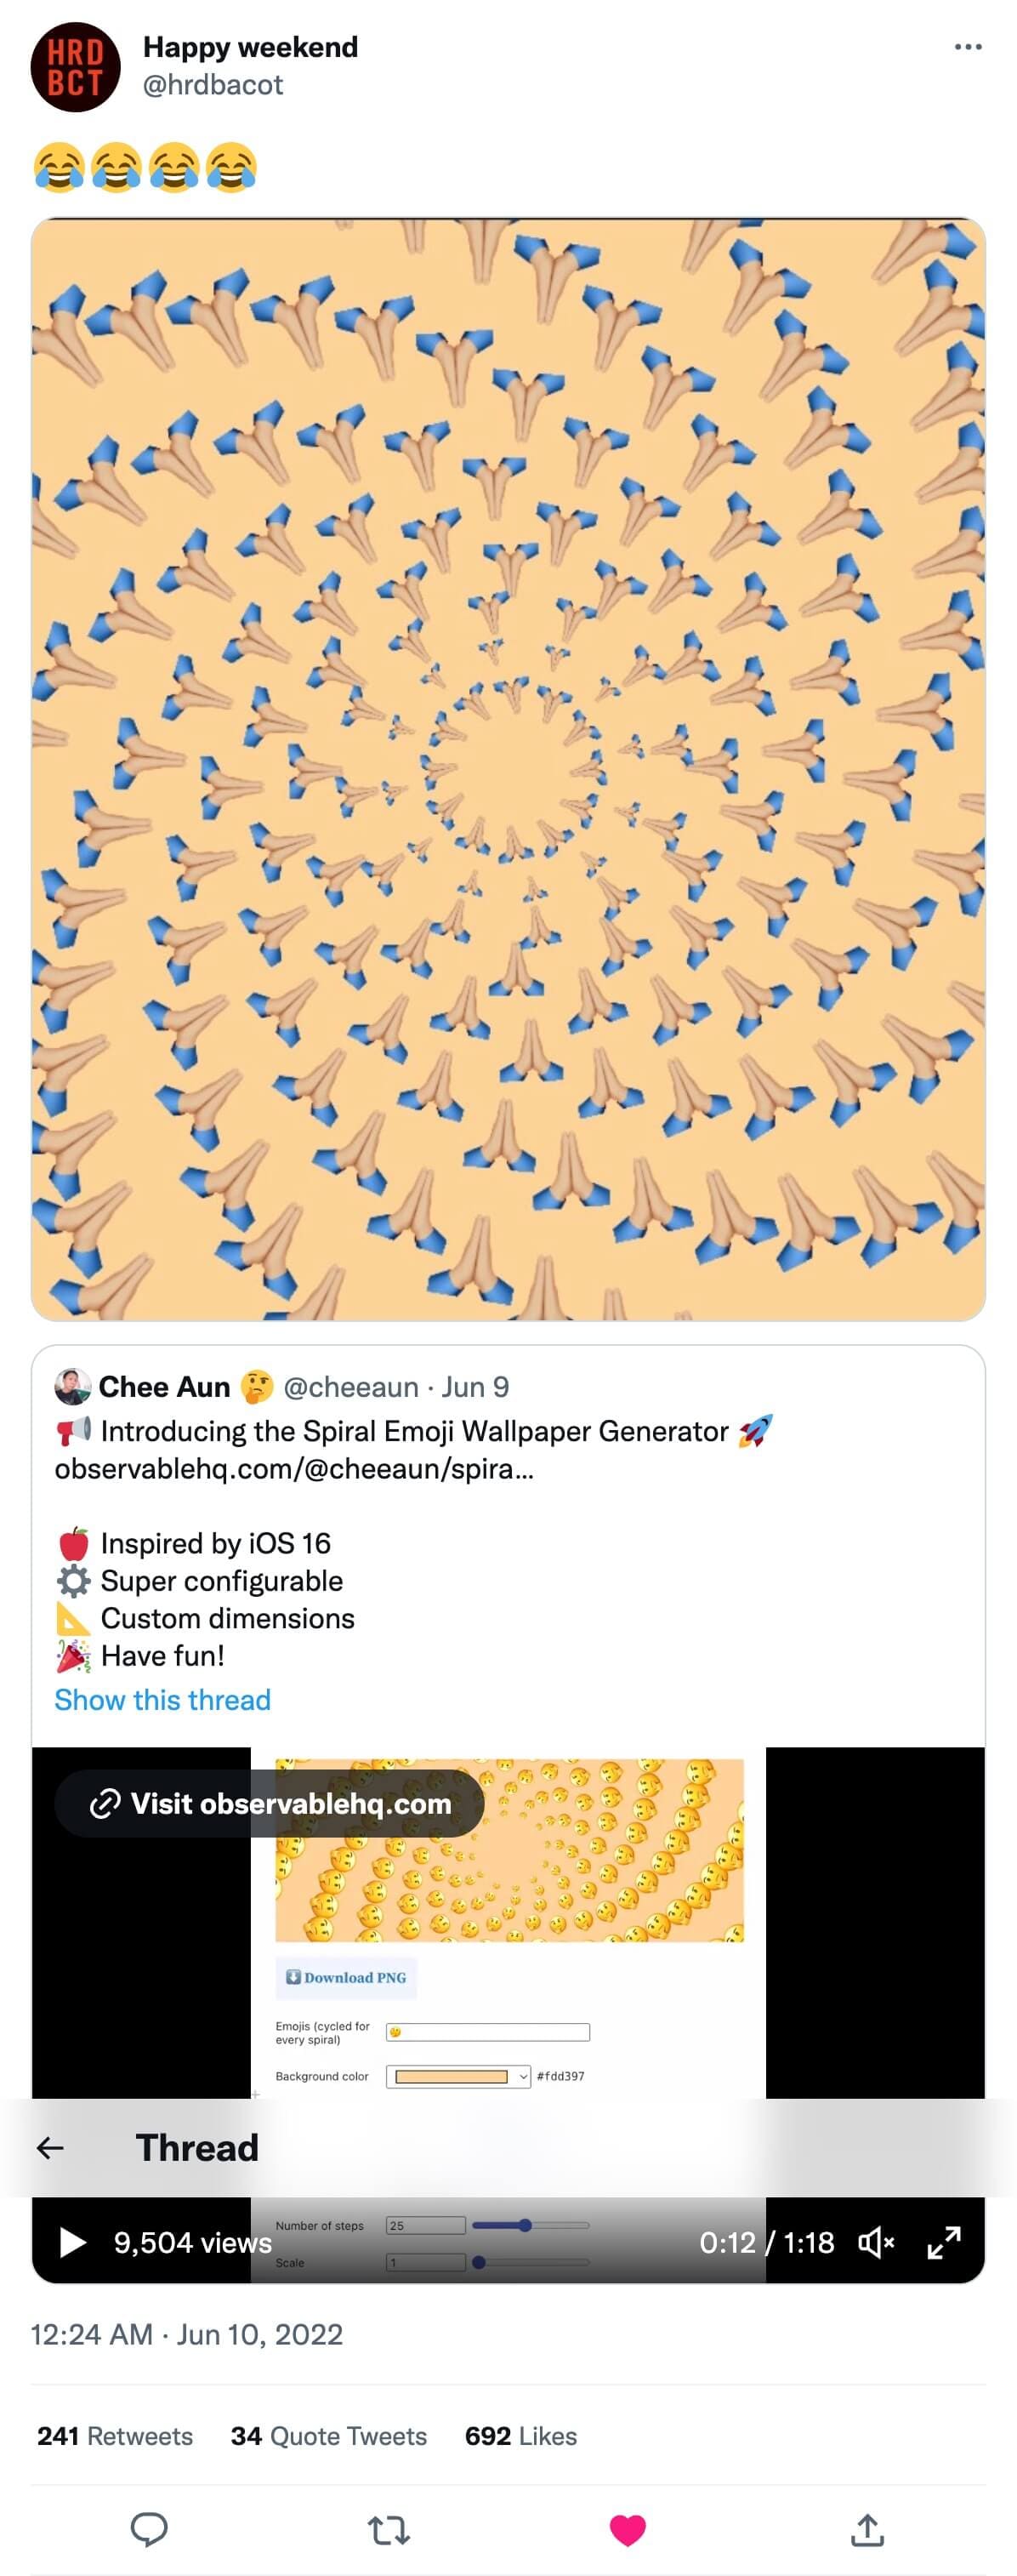 Twitter post by @hrdbacot, quote-tweeting my tweet about my Spiral Emoji Wallpaper Generator project, with a generated wallpaper of spiralling "🙏" characters. The quote-tweet received up to 200+ retweets, 30+ quote tweets and 600+ likes.